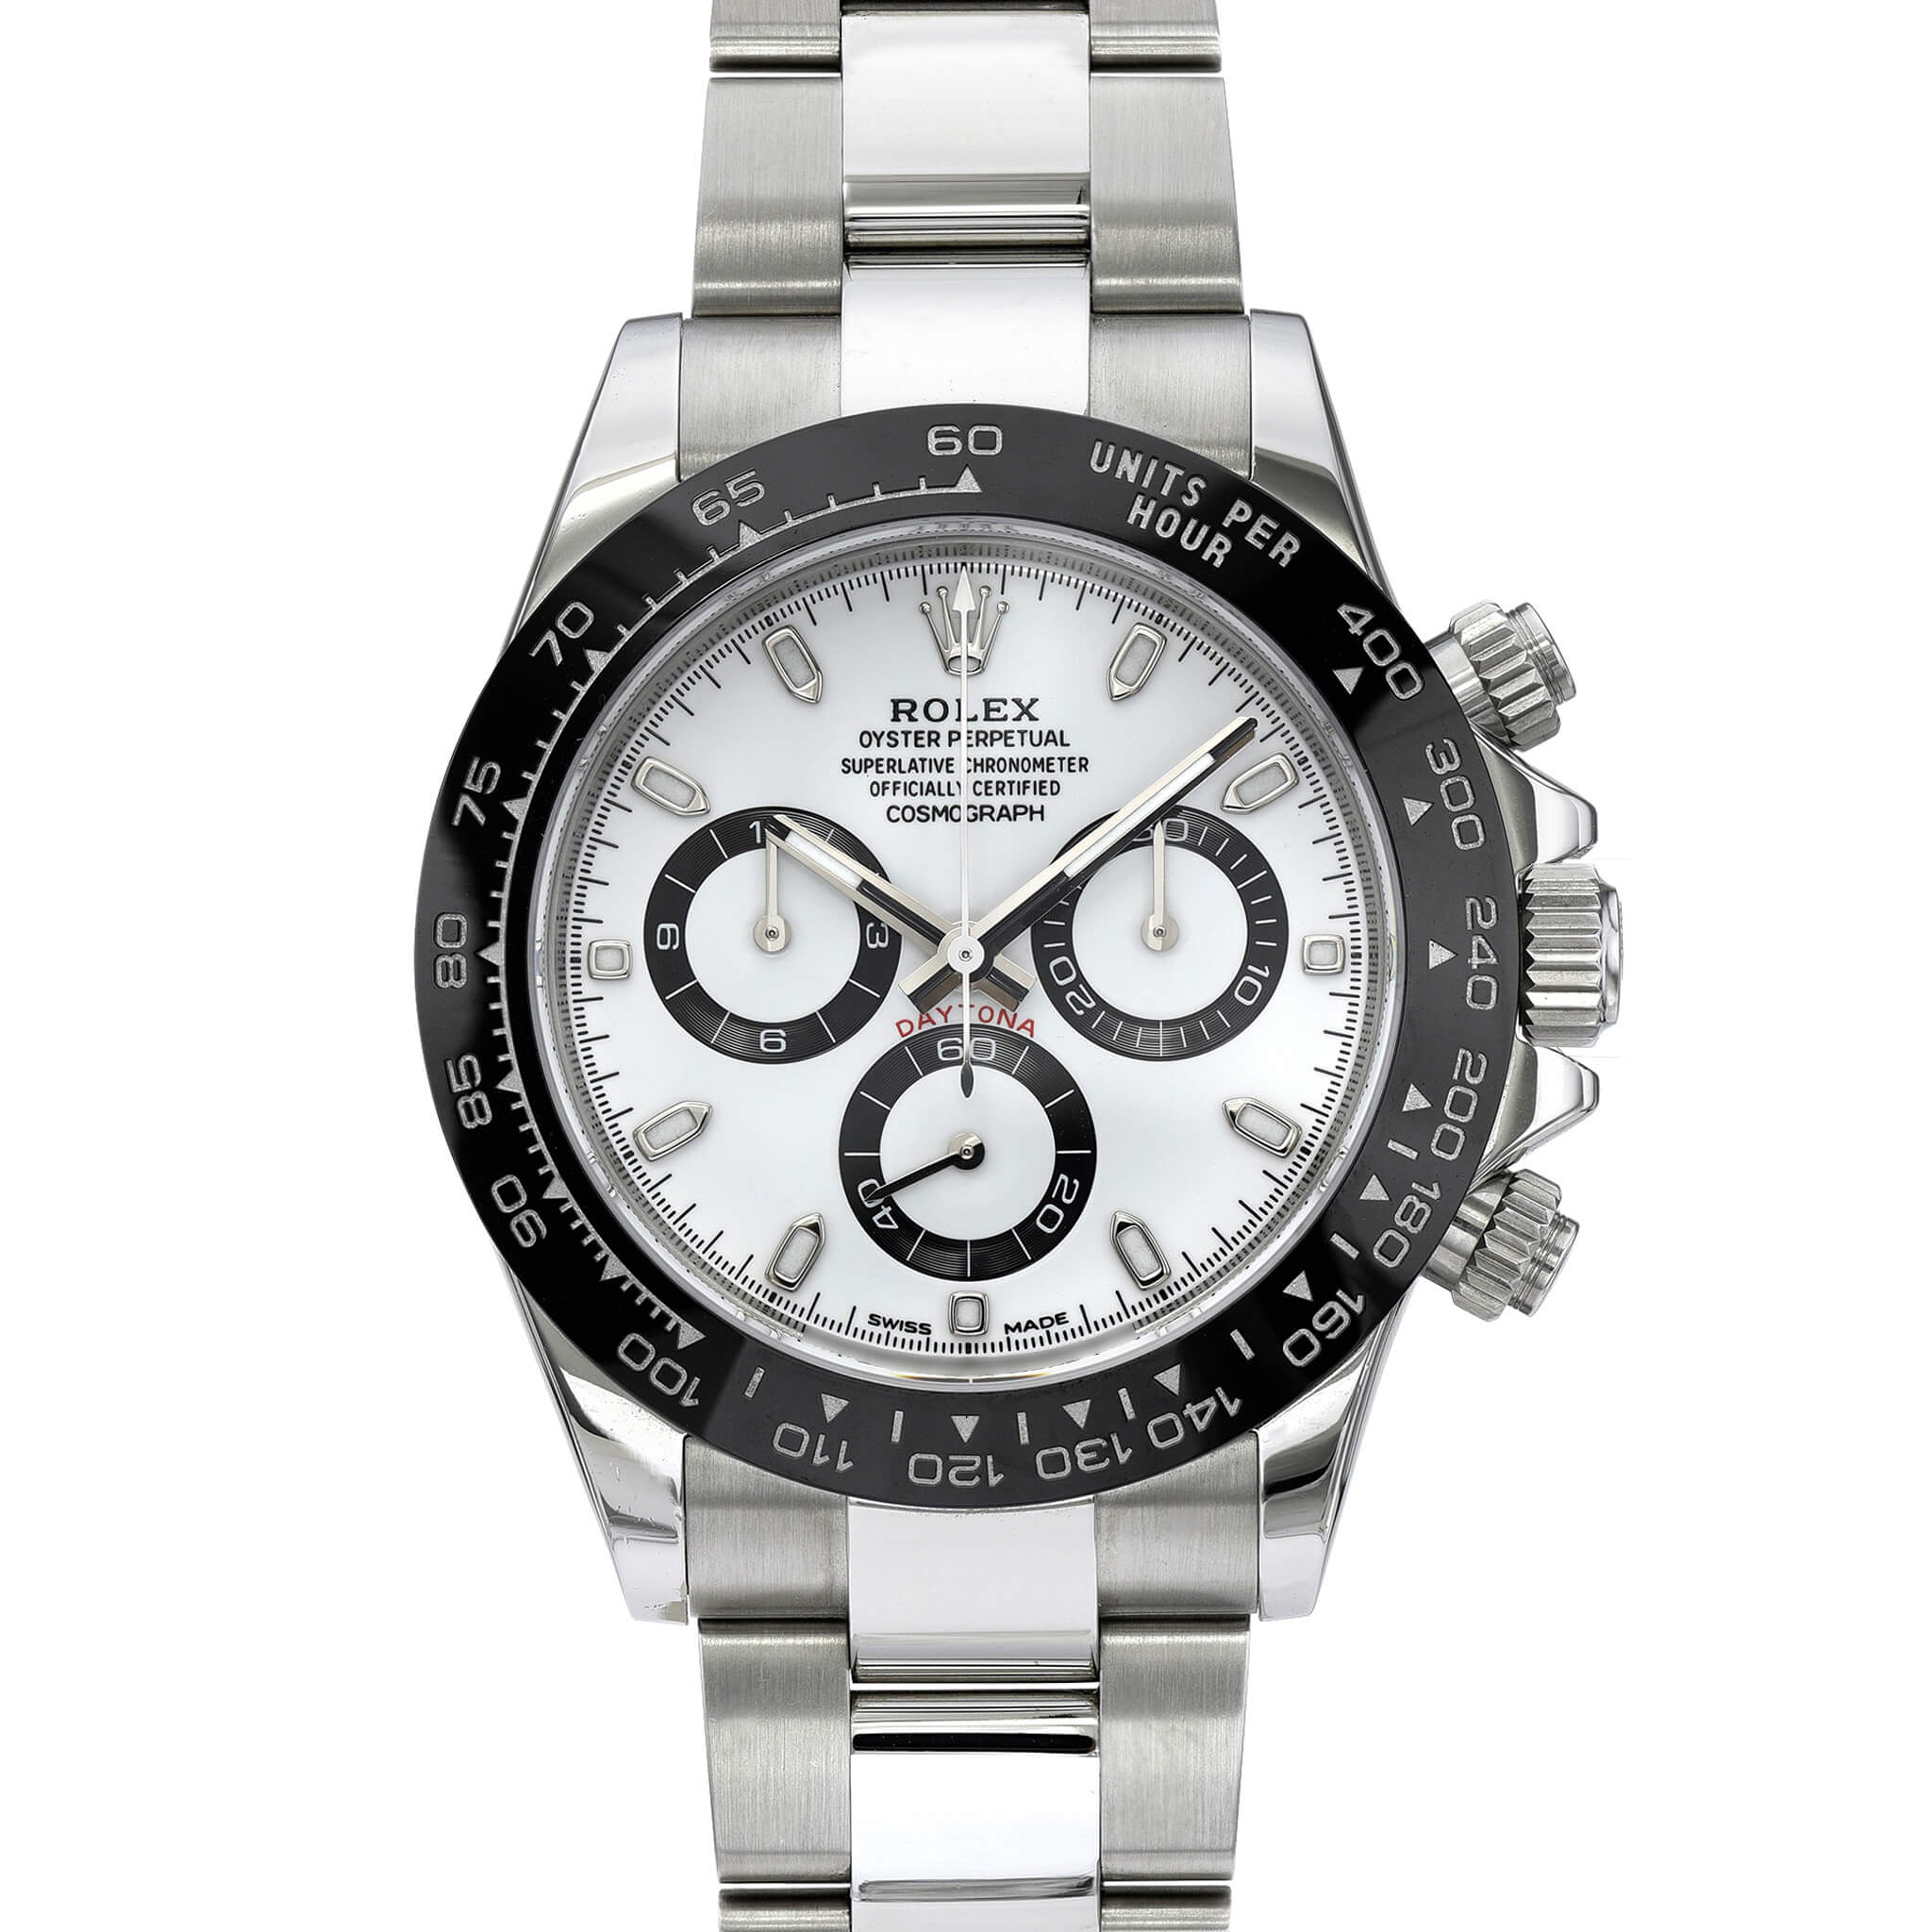 Rolex Daytona - Buy Pre-Owned and Used | WatchGuys